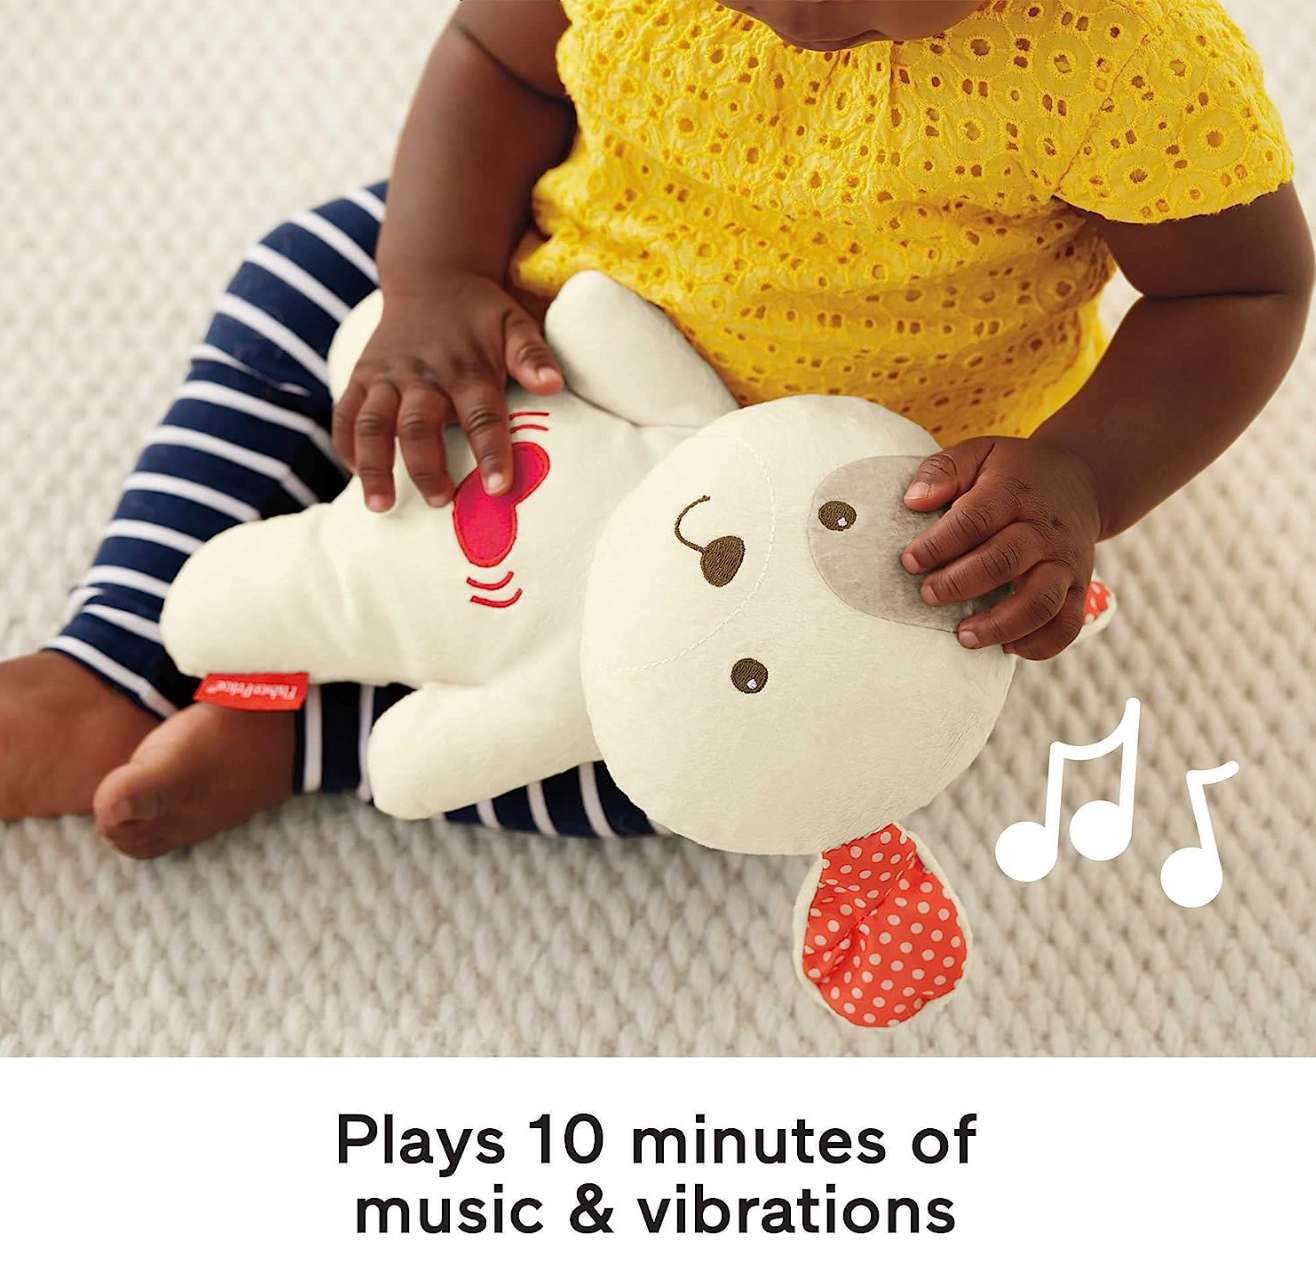 Fisher Price Portable Sound Machine Calming Vibrations Cuddle Soother Plush Dog Infant Toy with Music for Newborns